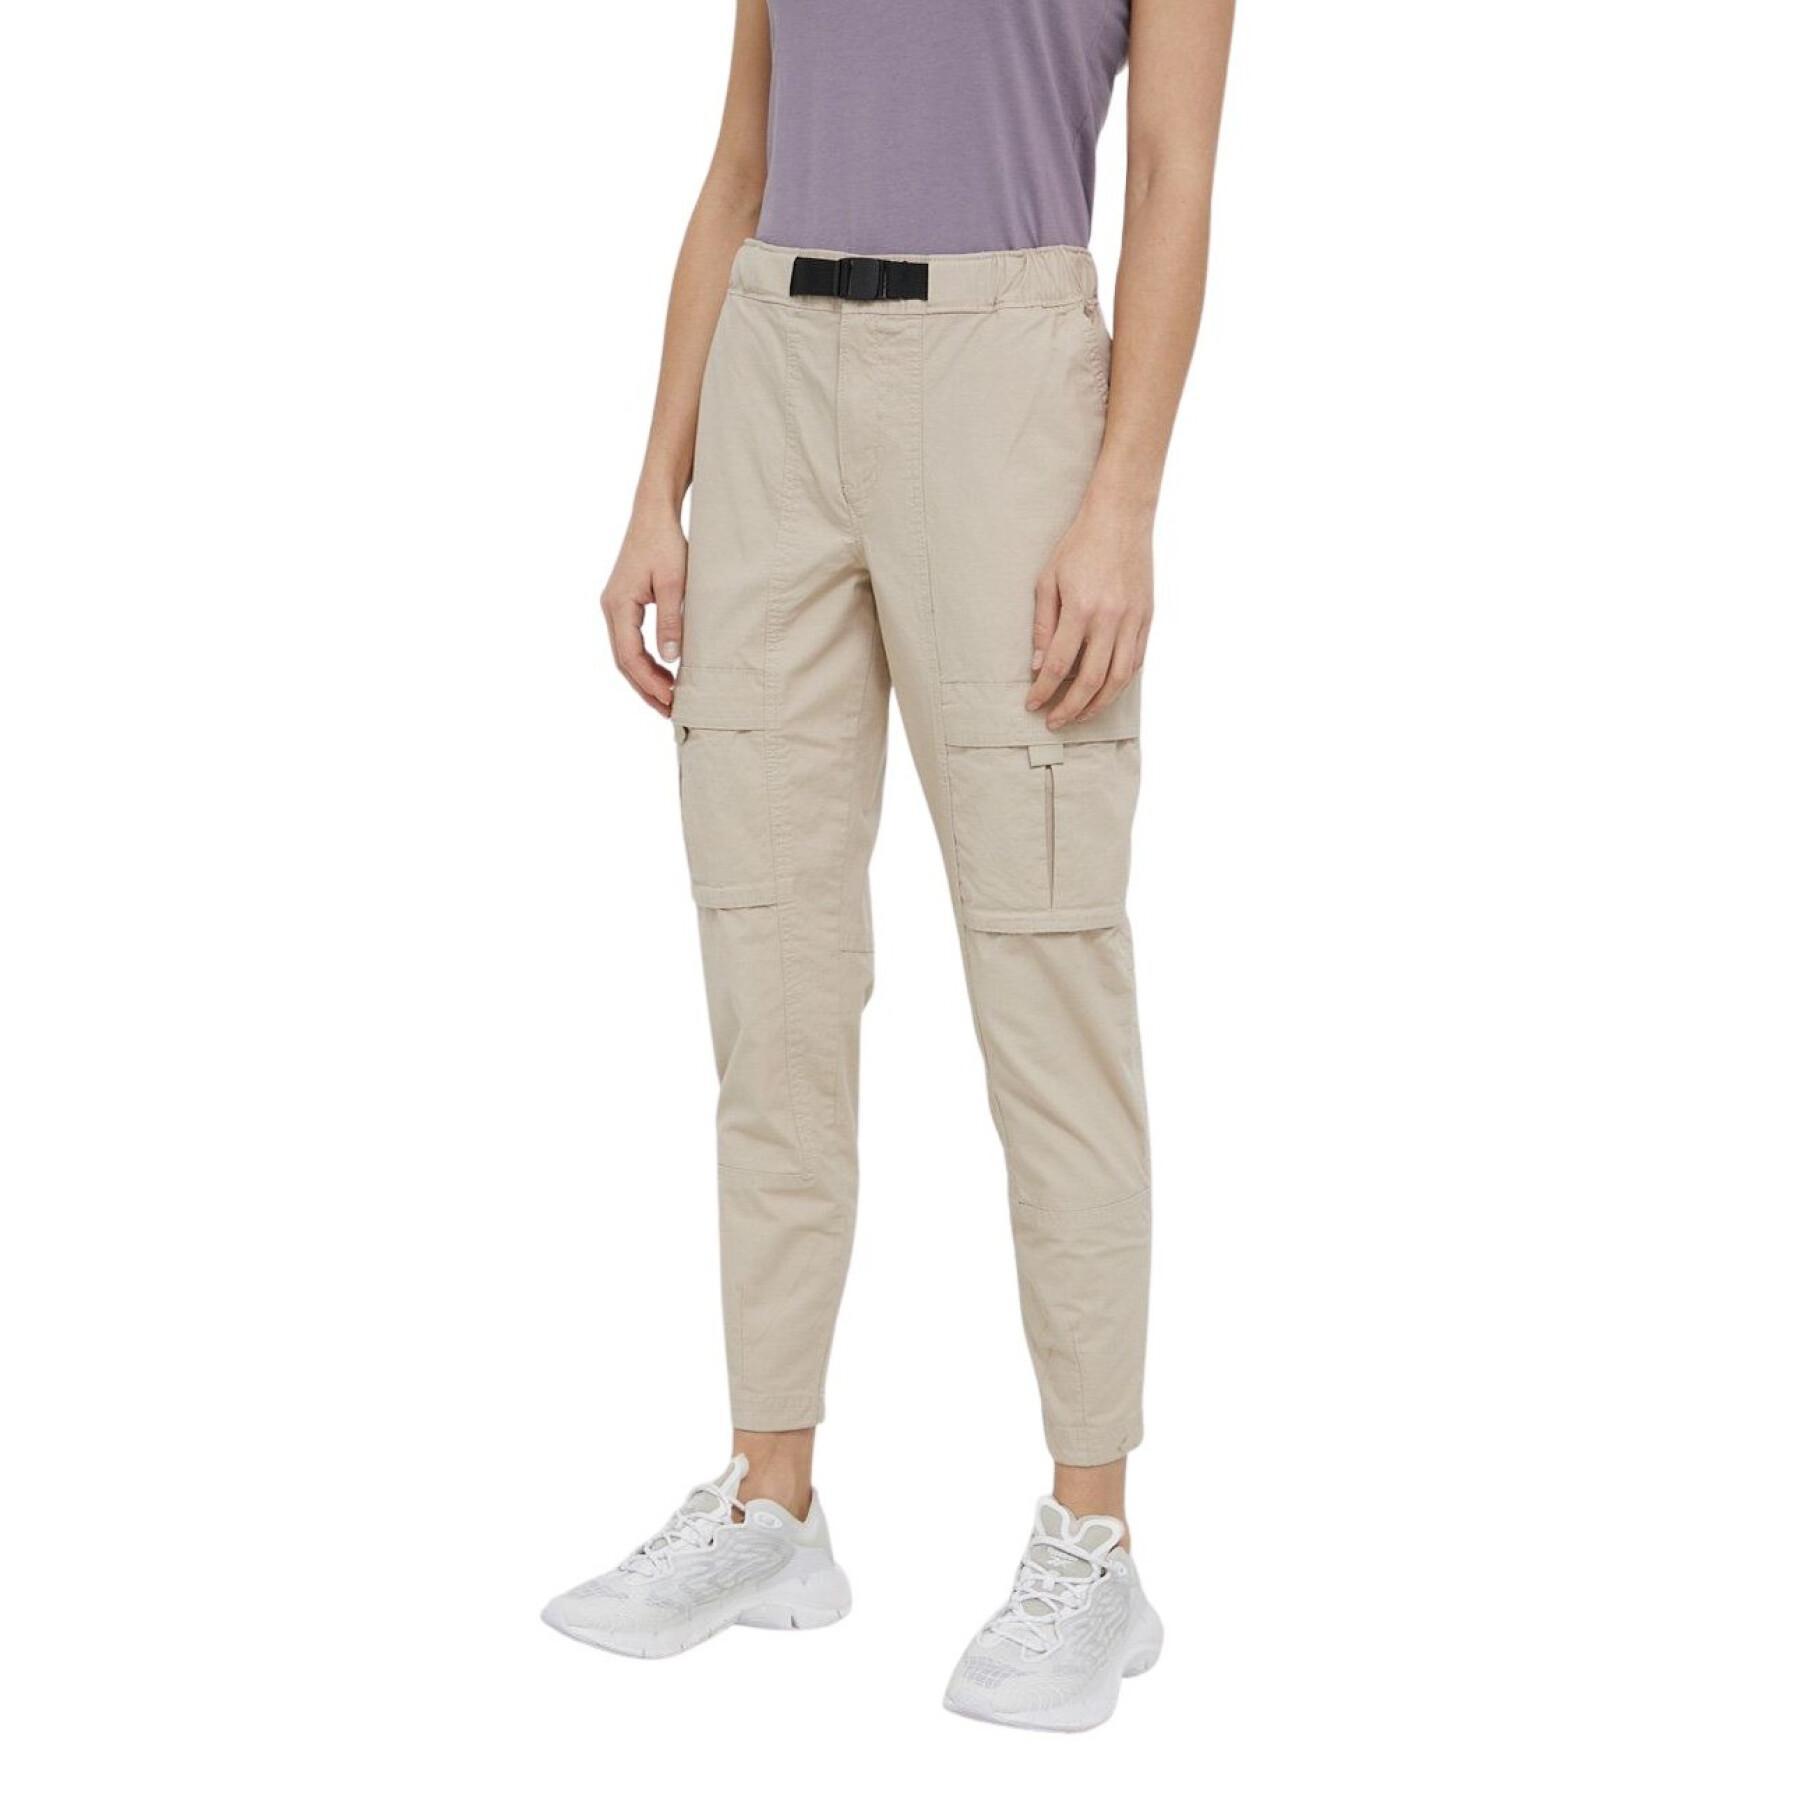 Casual Trousers • Shop The Cheap Clothing, Shoes, Accessories - Columbia •  Ronak Press